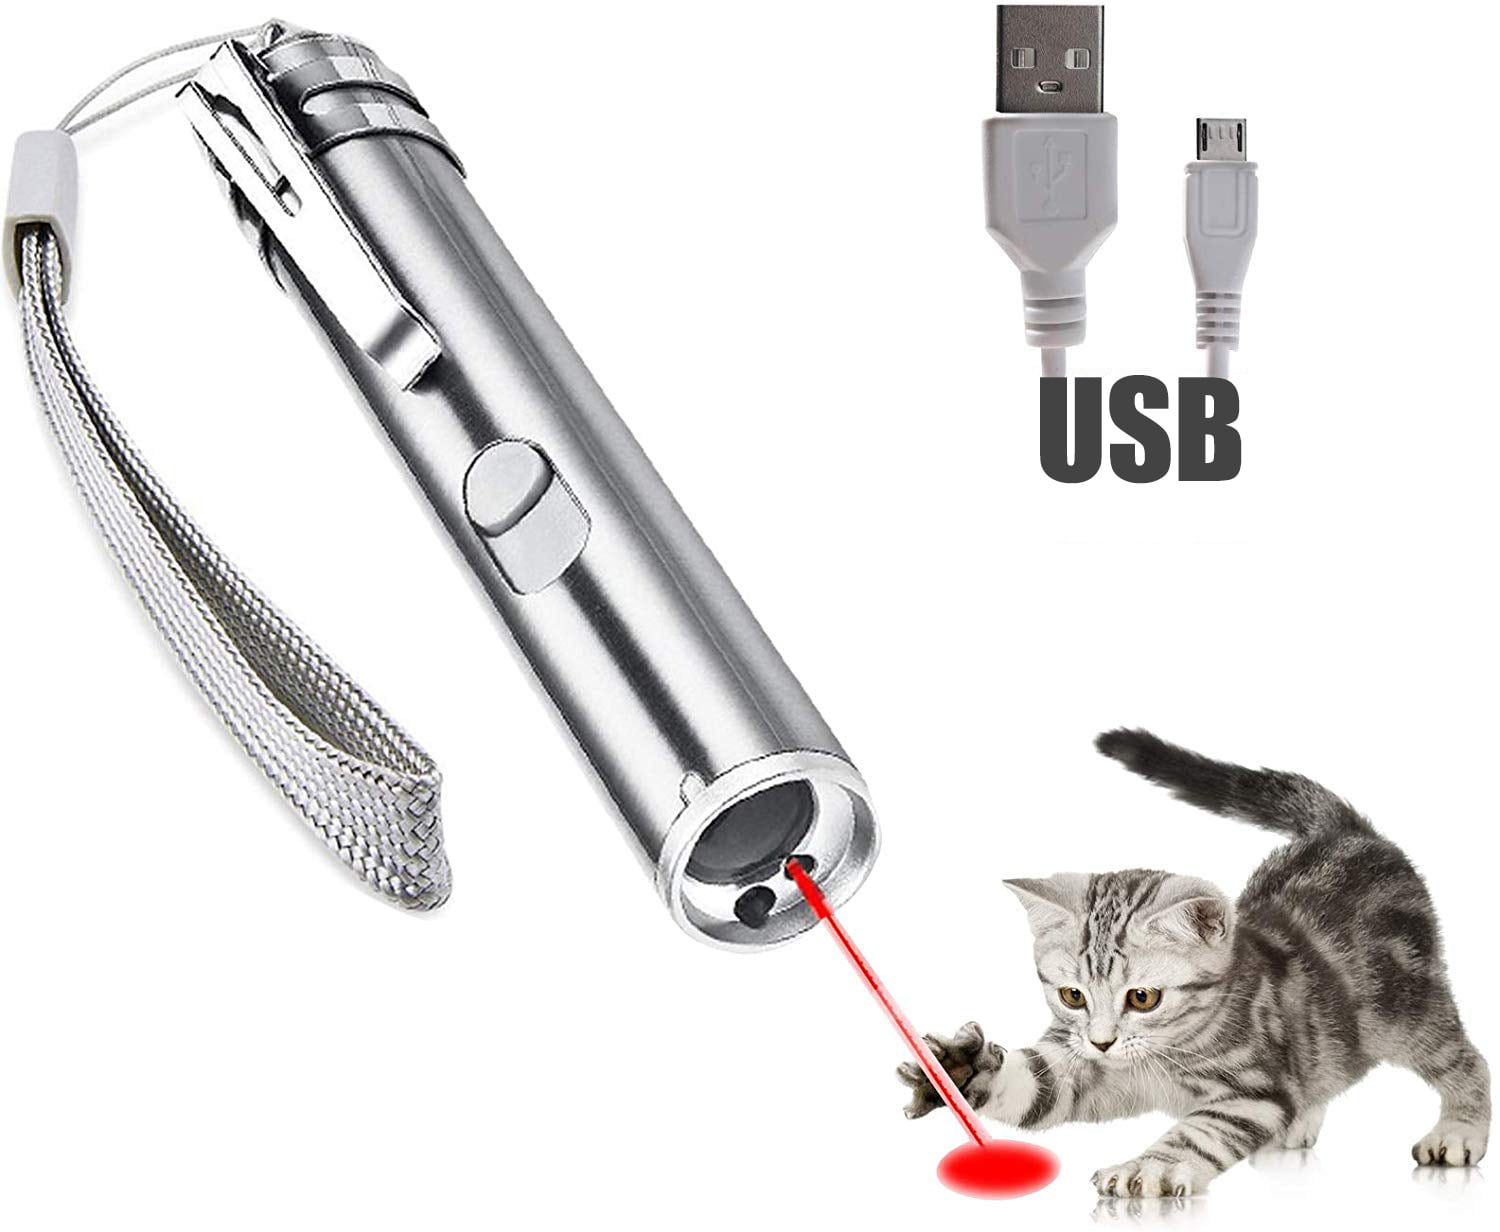 LAZER POINTER PEN LED TORCH PET CAT DOG TOY BRAND NEW 2 in 1 LASER 